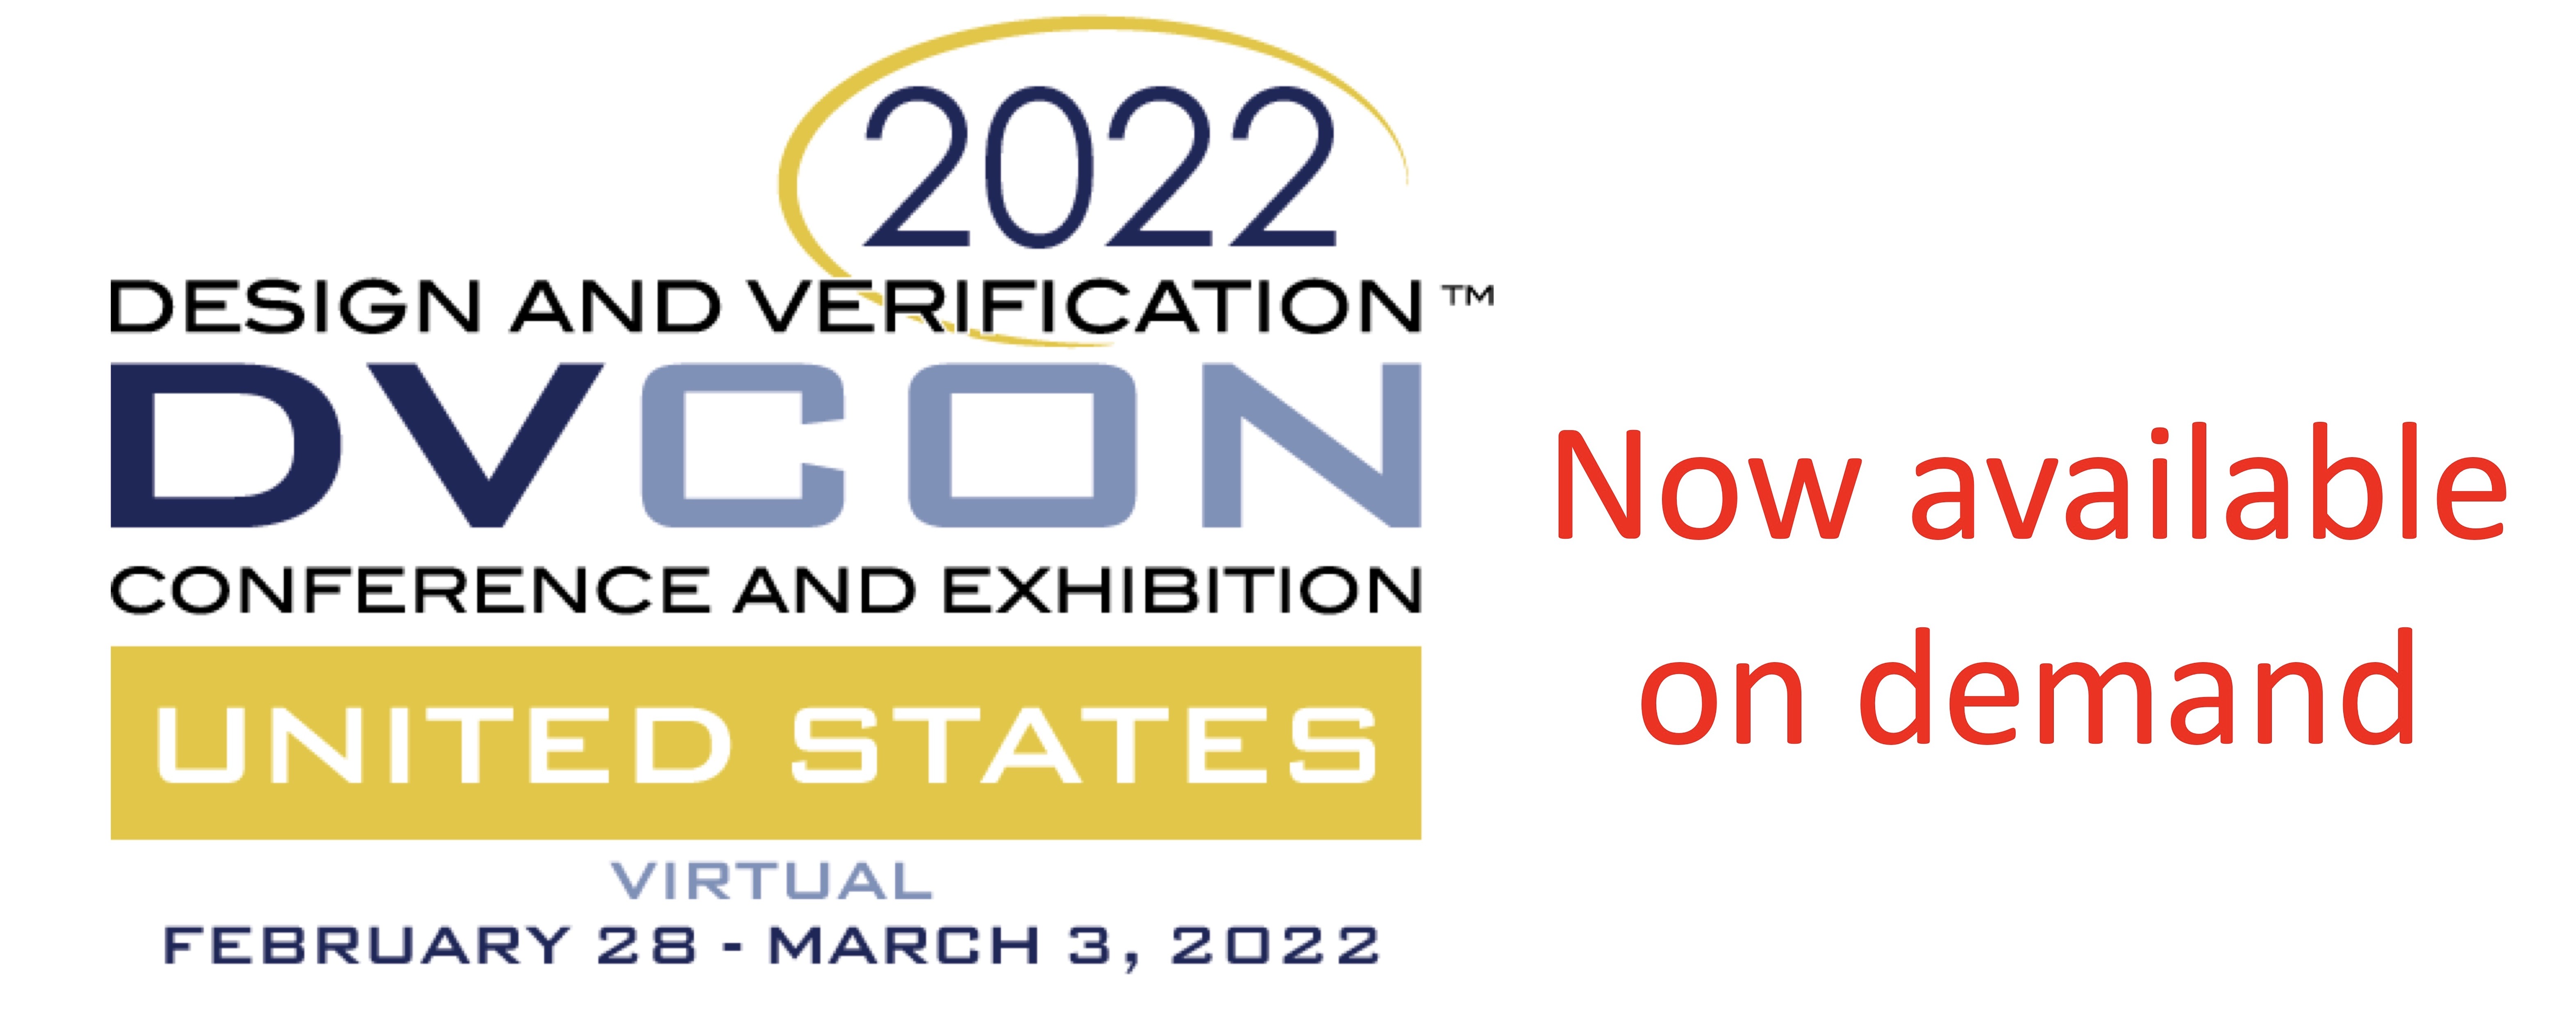 DVCon 2022 now available on-demand